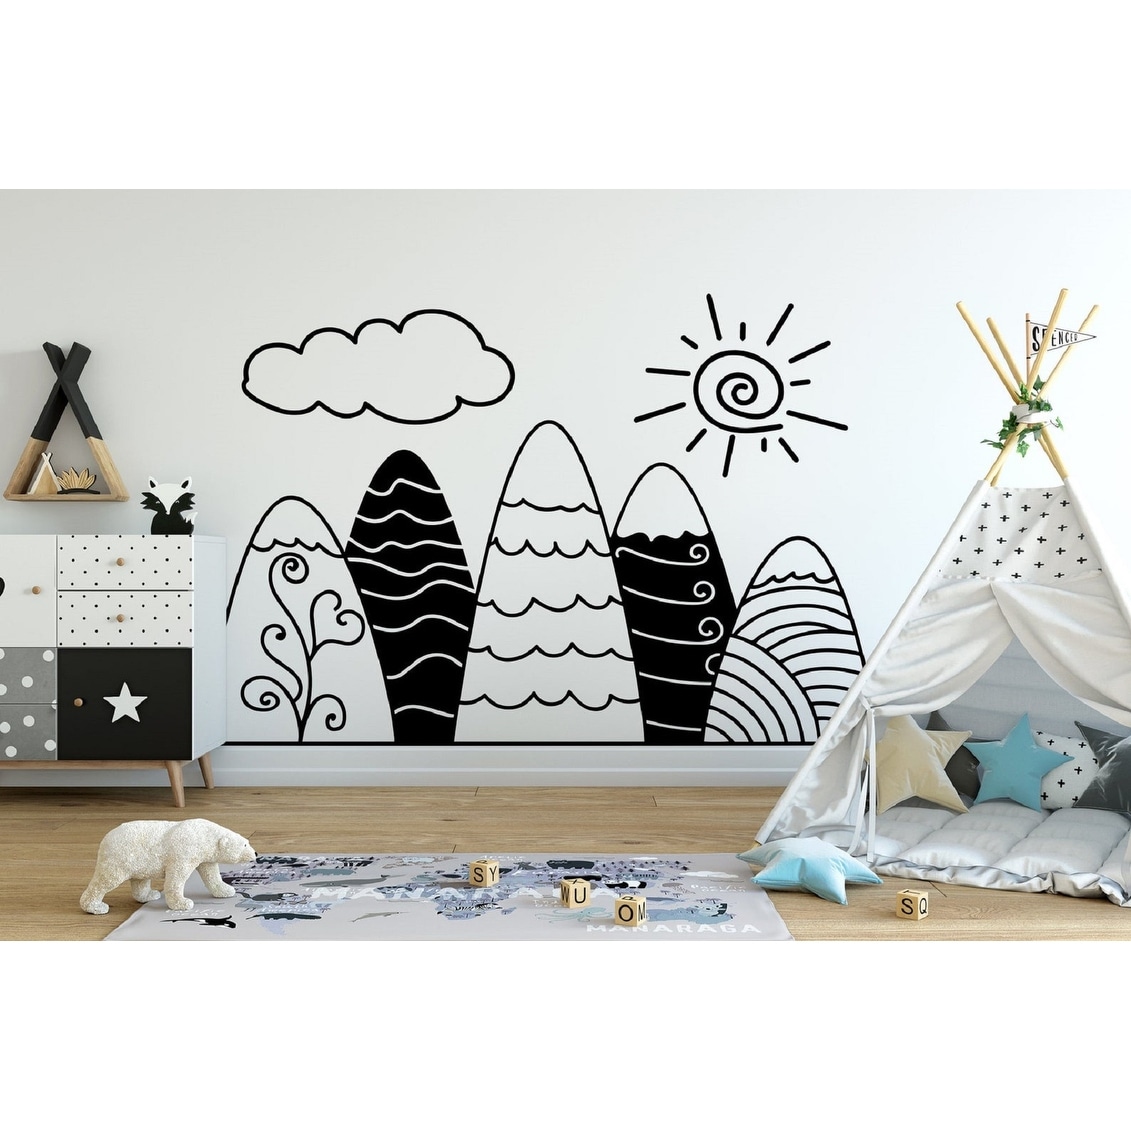 Kids Mountain Wall Decal WD481ph Kids Room Fabric Wall Decal Ecofriendly No Toxins No PVCs Decals